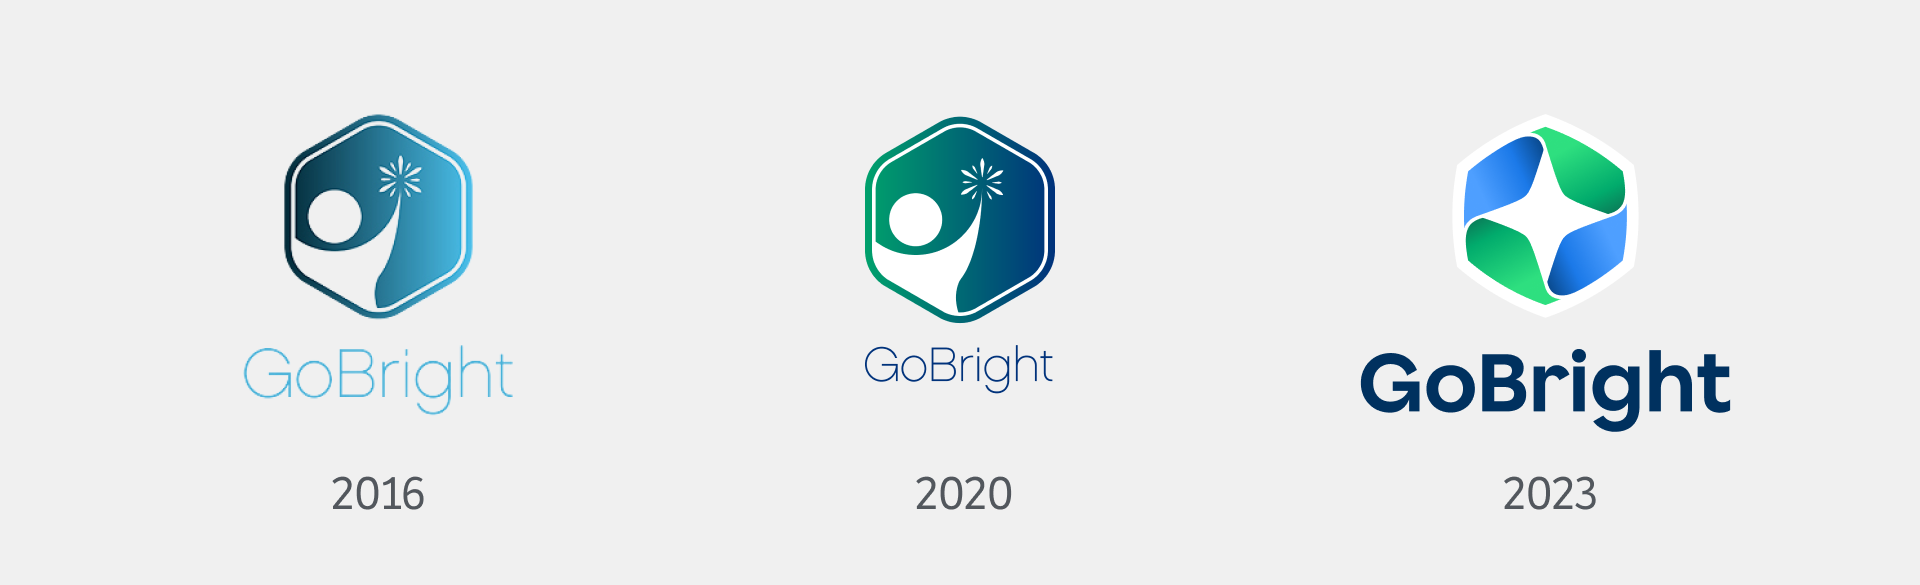 GoBright - Corporate Identity - logo throughout the year - Rebranding